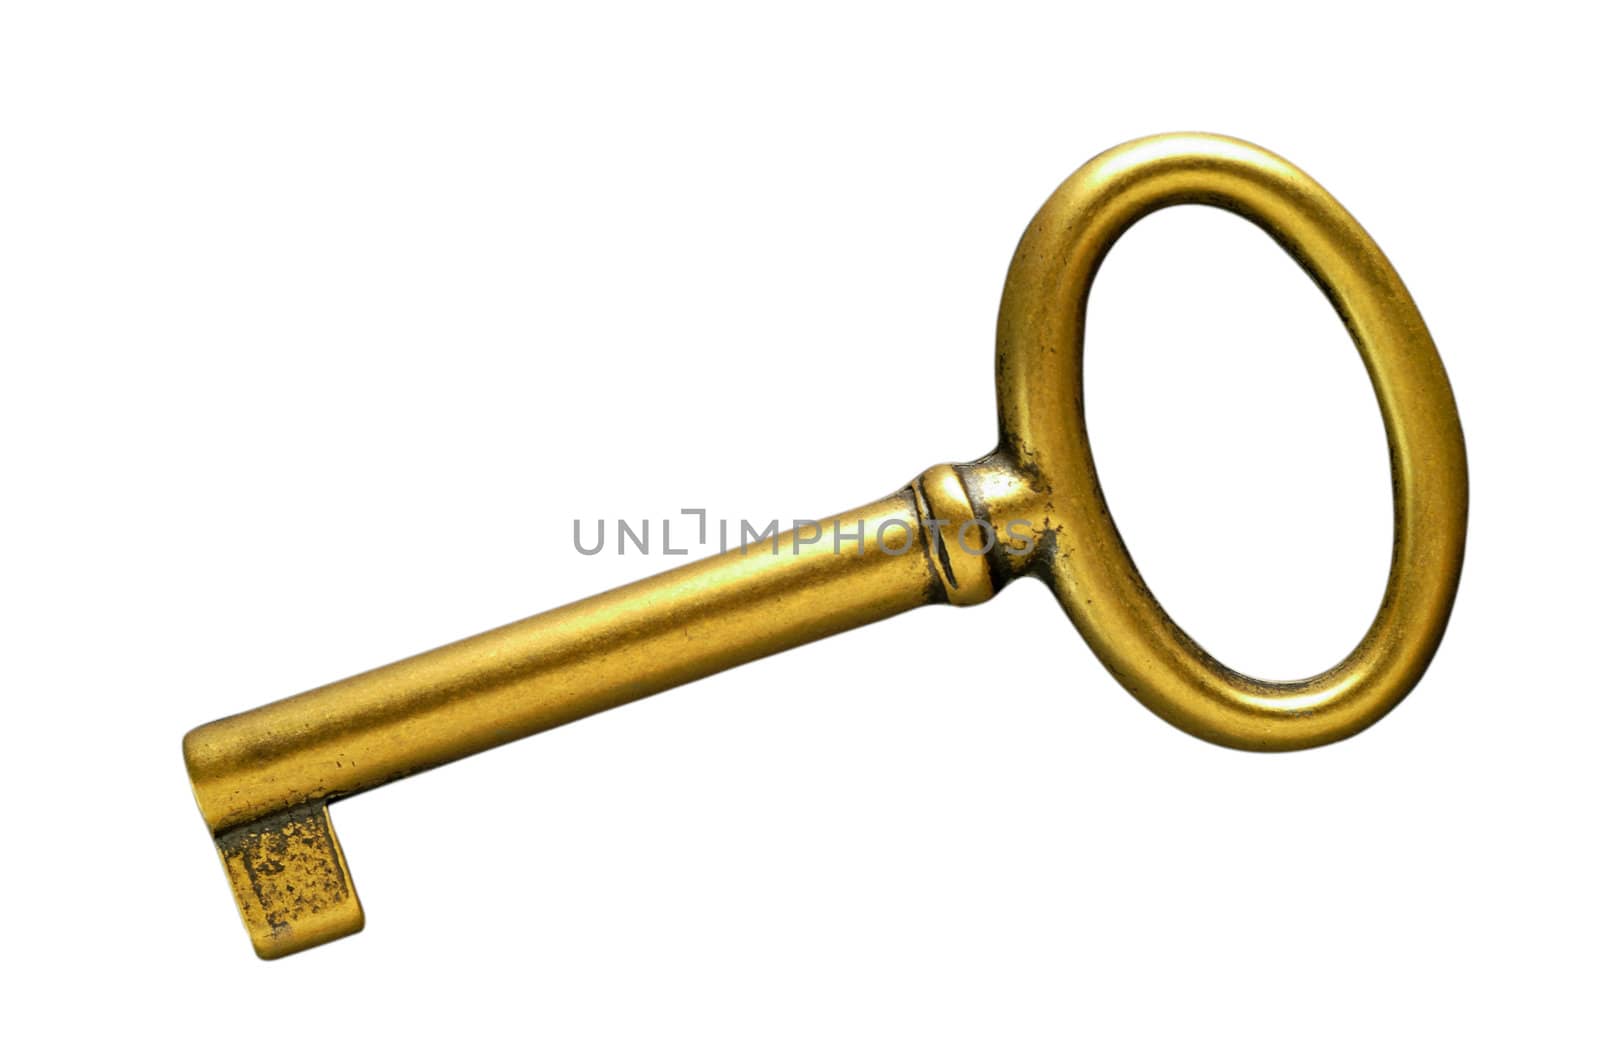 Golden key with clipping path by Laborer